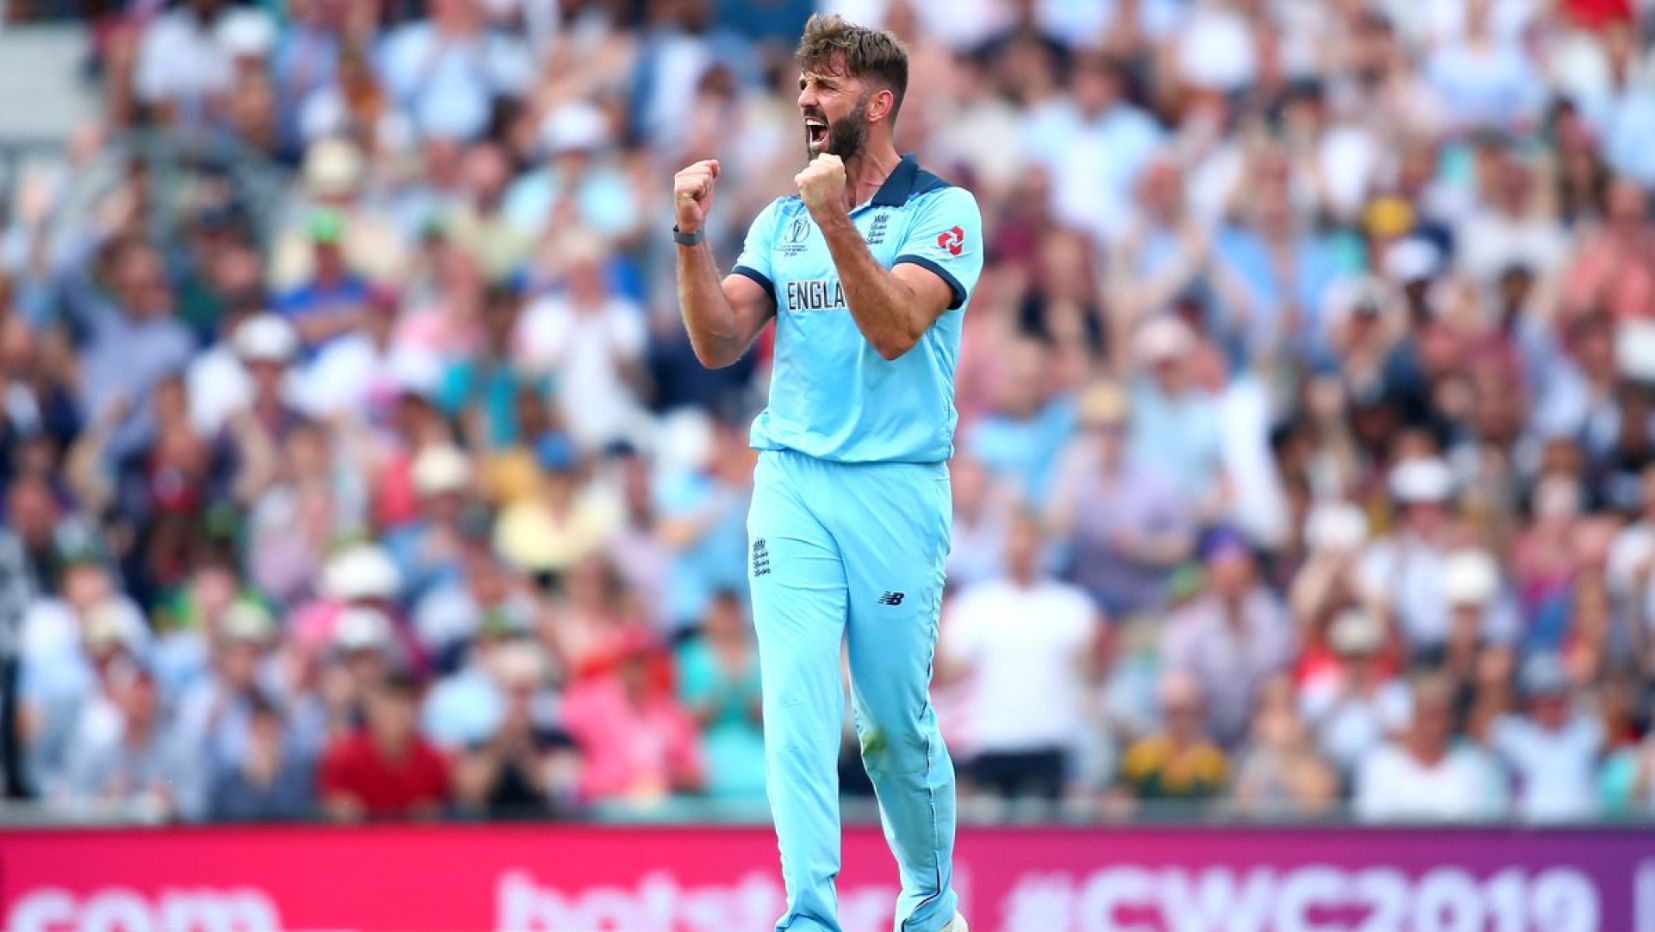 They didn’t even call: Disappointed Plunkett shreds into ECB for ill-treatment post World Cup win 